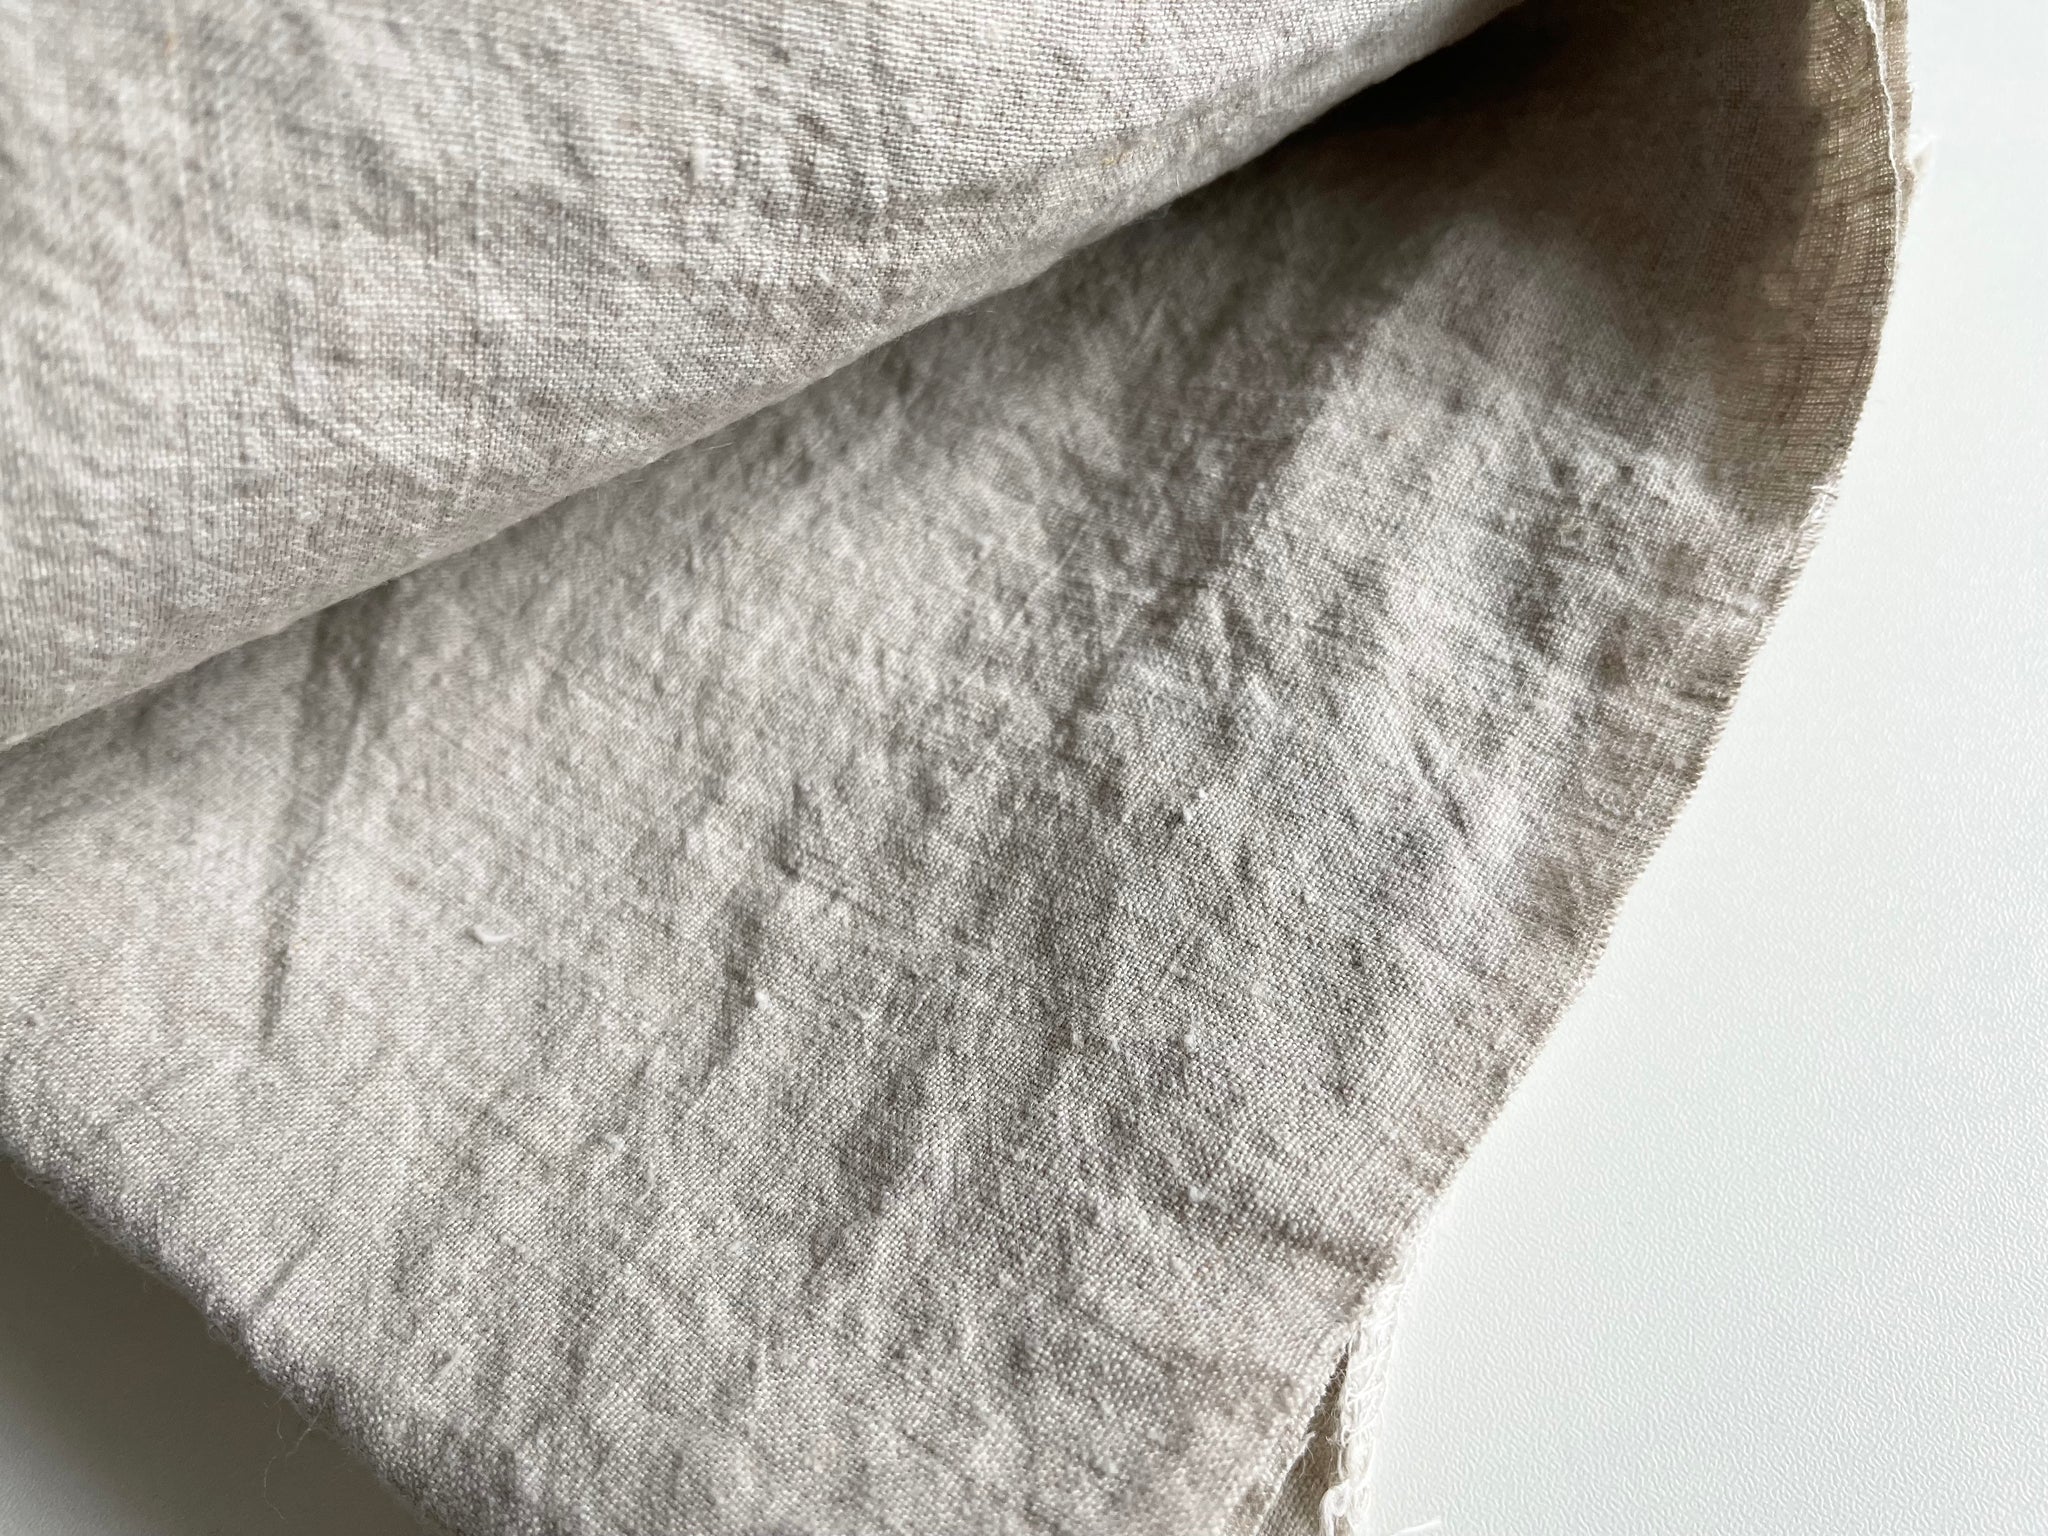 Linen Fabric Remnants - Natural Stone Washed